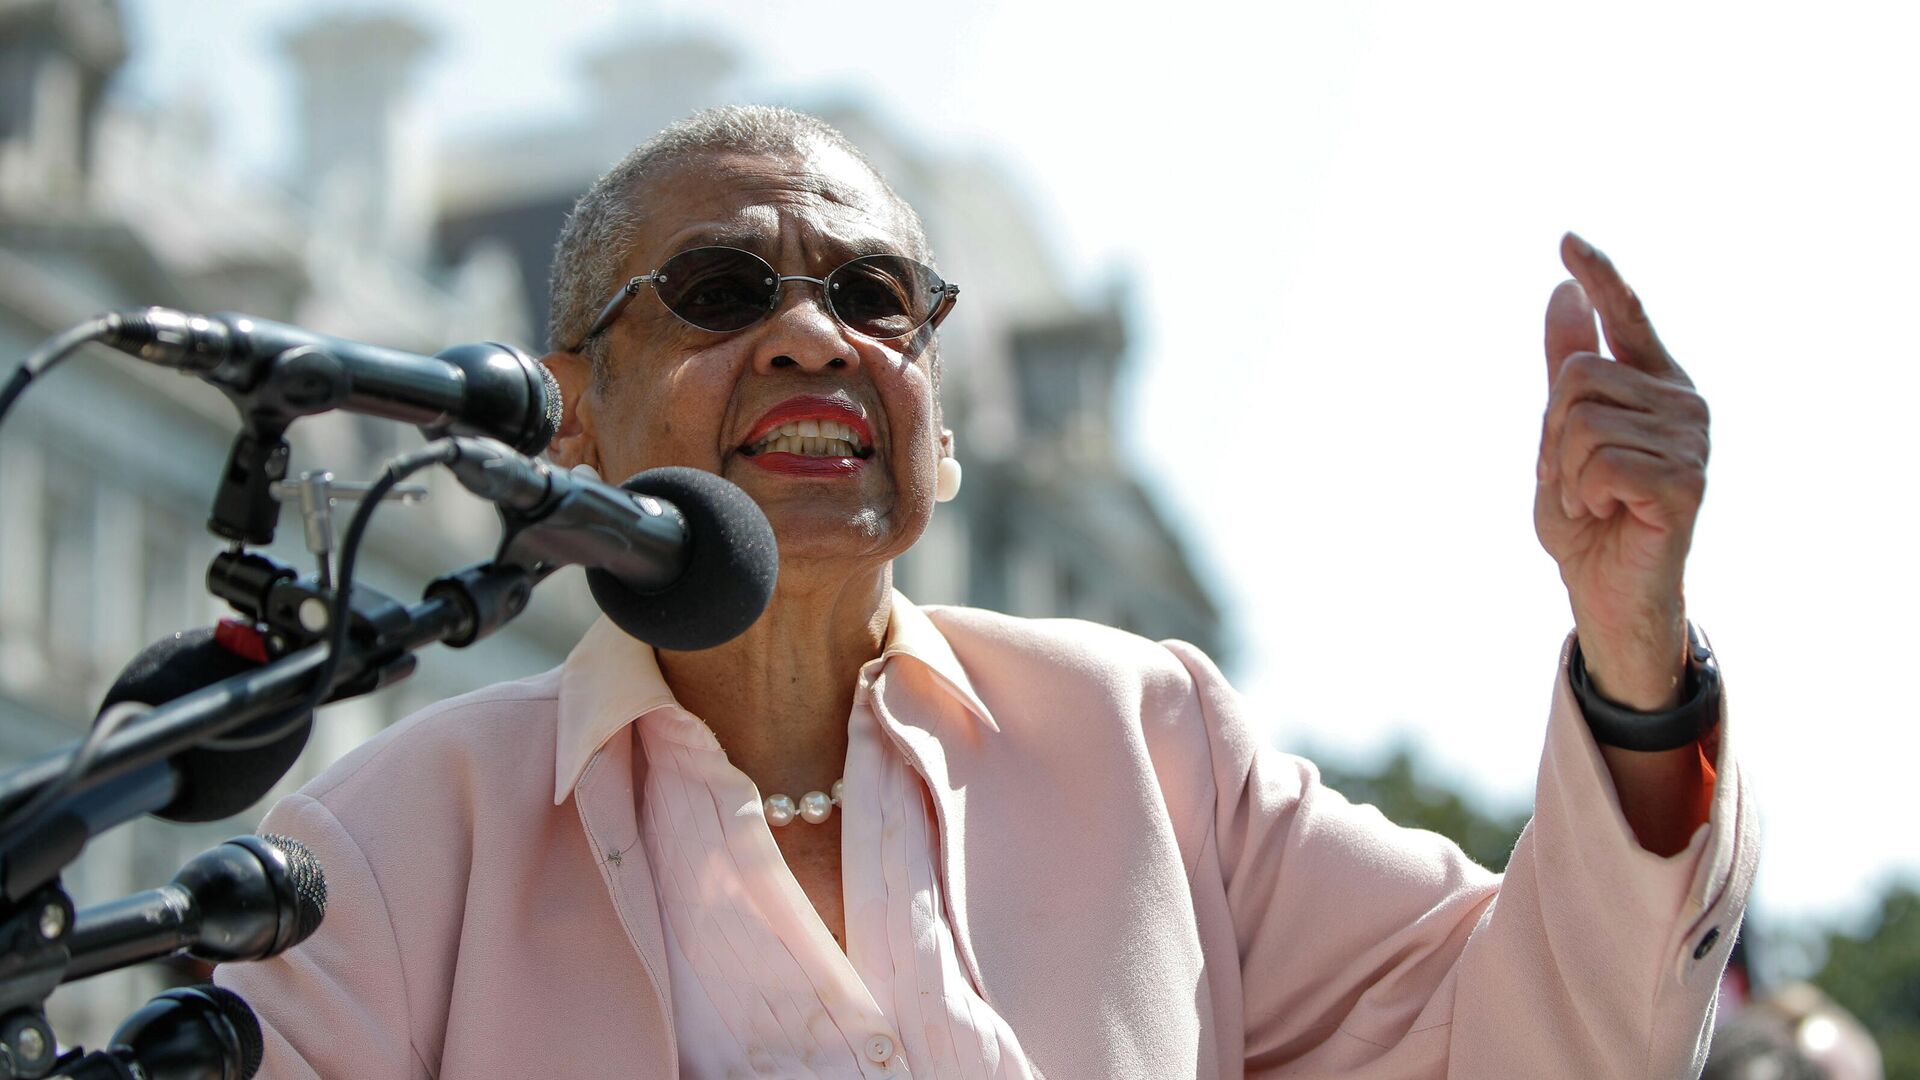 D.C. Delegate Eleanor Holmes Norton speaks about a petition drive urging the Senate to end the filibuster and pass voting rights legislation during a news conference near the White House, in Washington, U.S., August 12, 2021 - Sputnik International, 1920, 11.09.2021